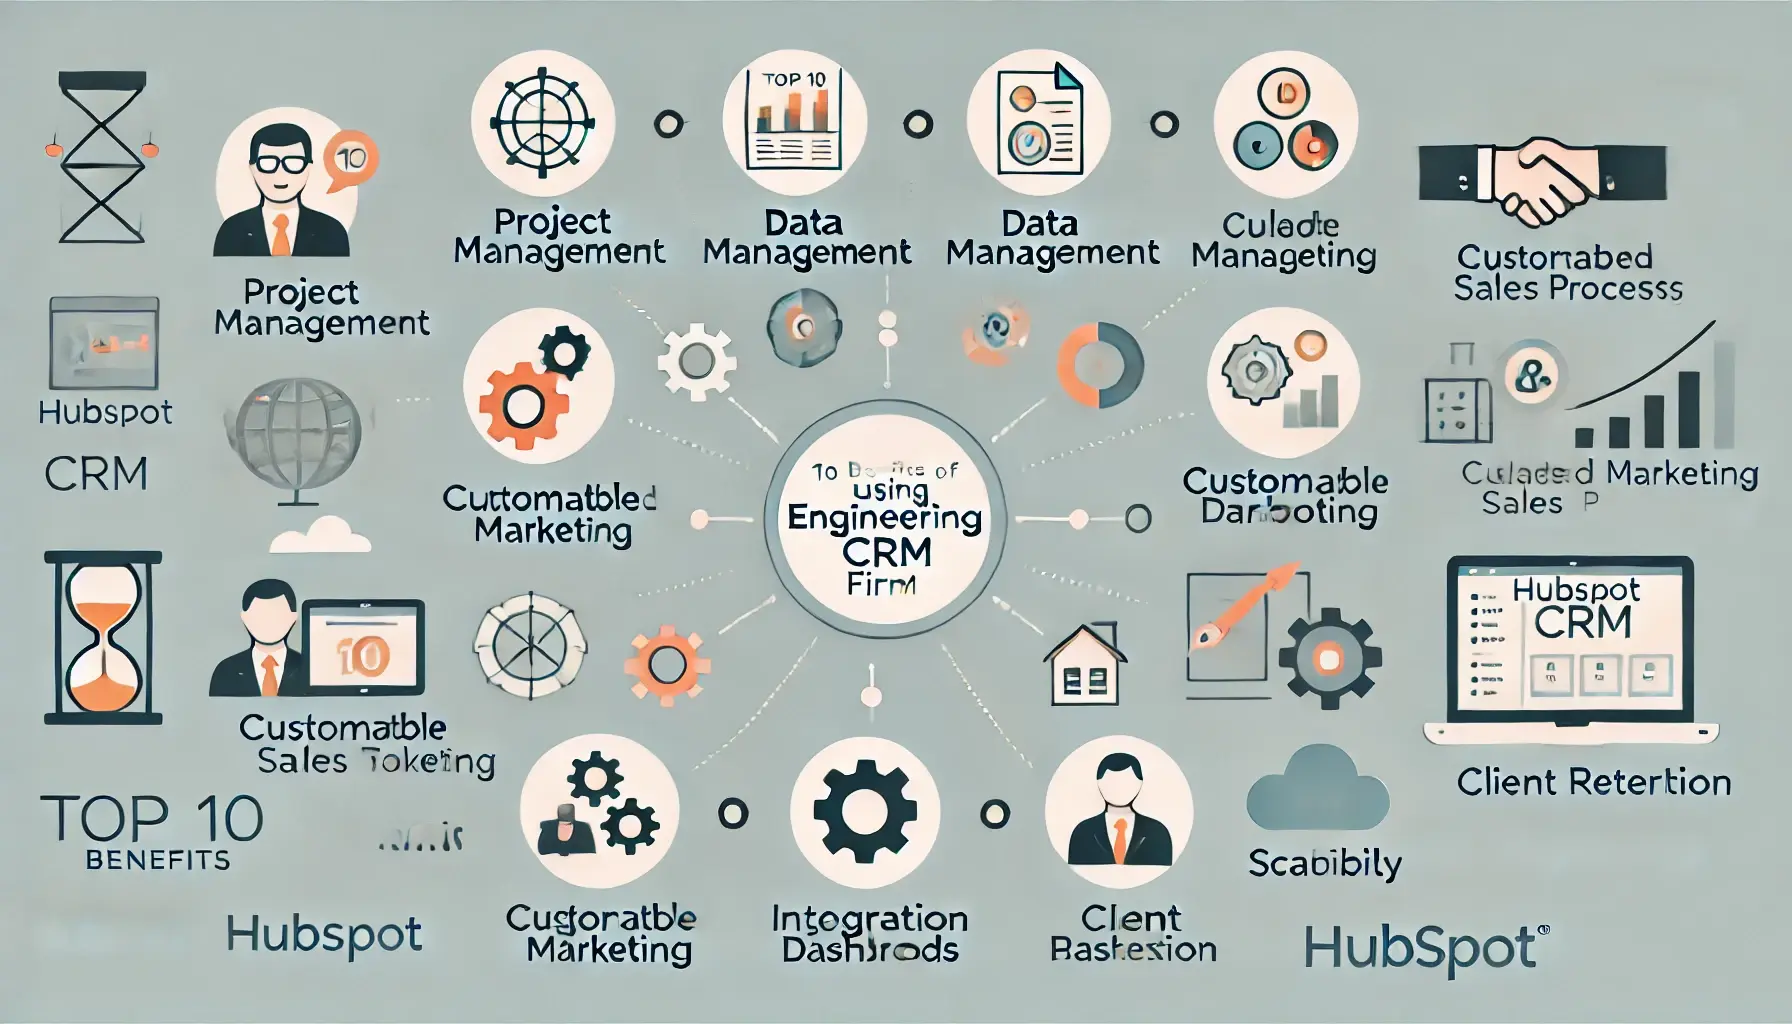 10 Benefits of Using HubSpot CRM for Engineering Firms